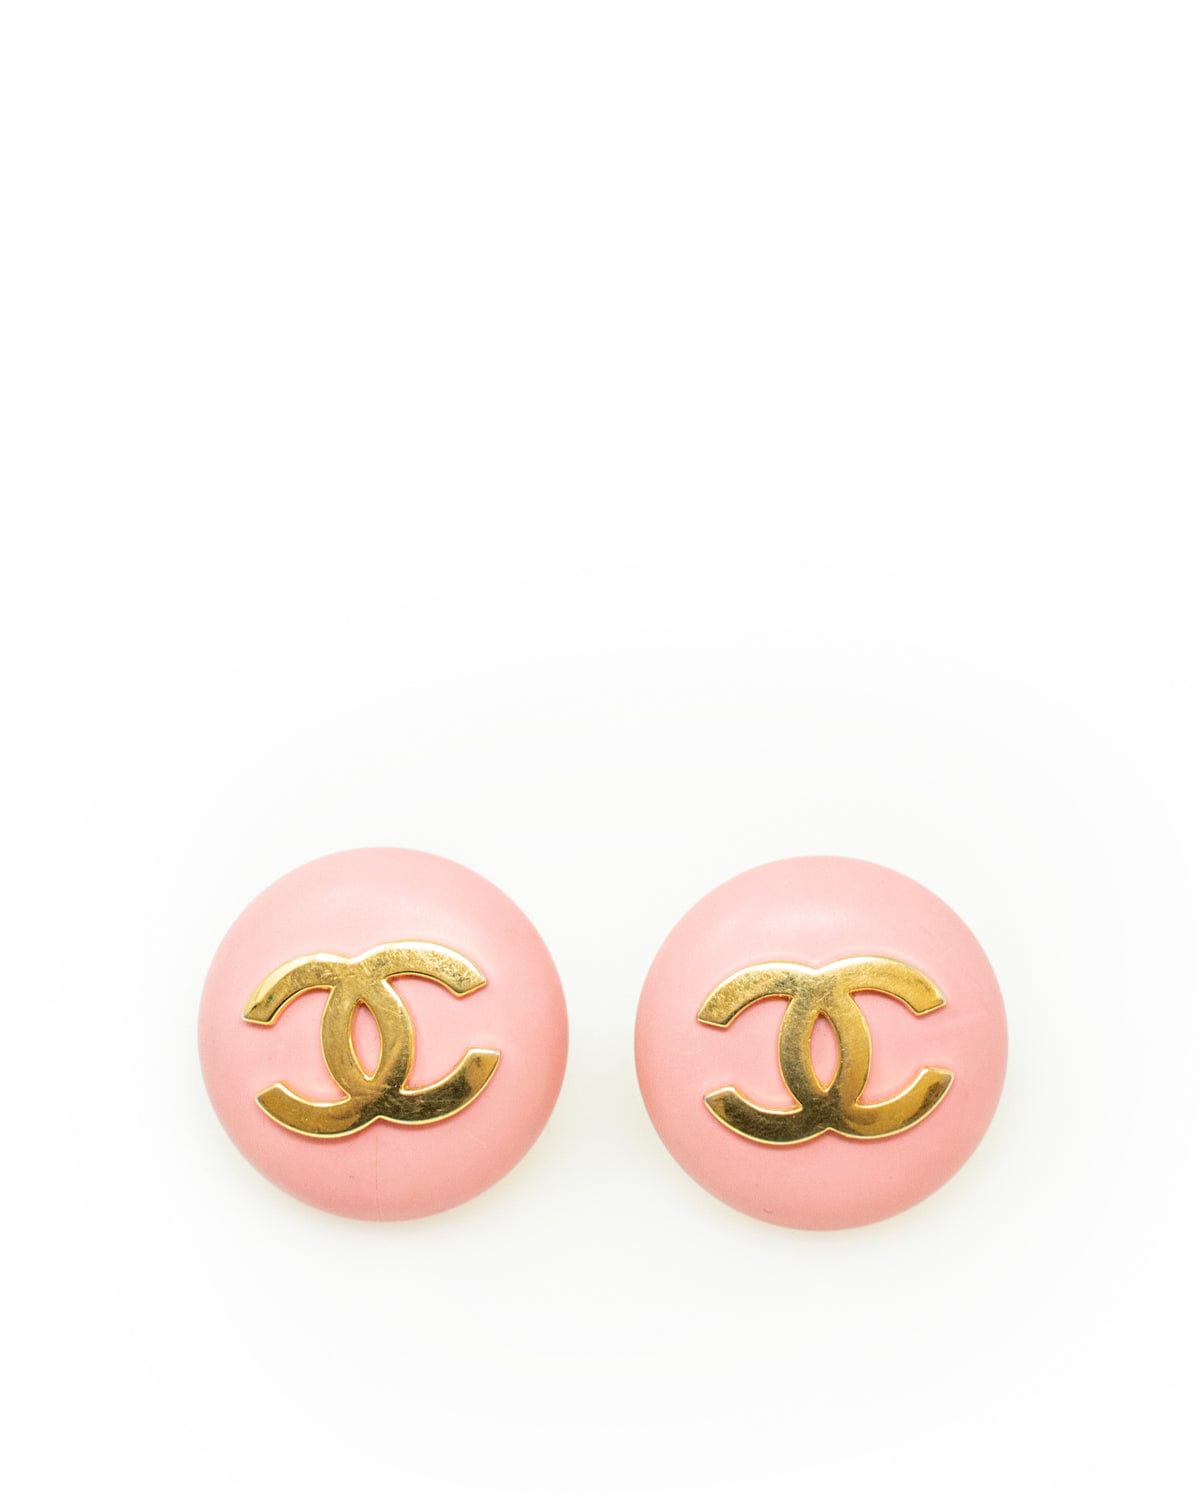 used Pre-owned Chanel Earrings Chanel CC Mark Stripe Pattern Red/White Gold (Good), Women's, Size: One size, Grey Type